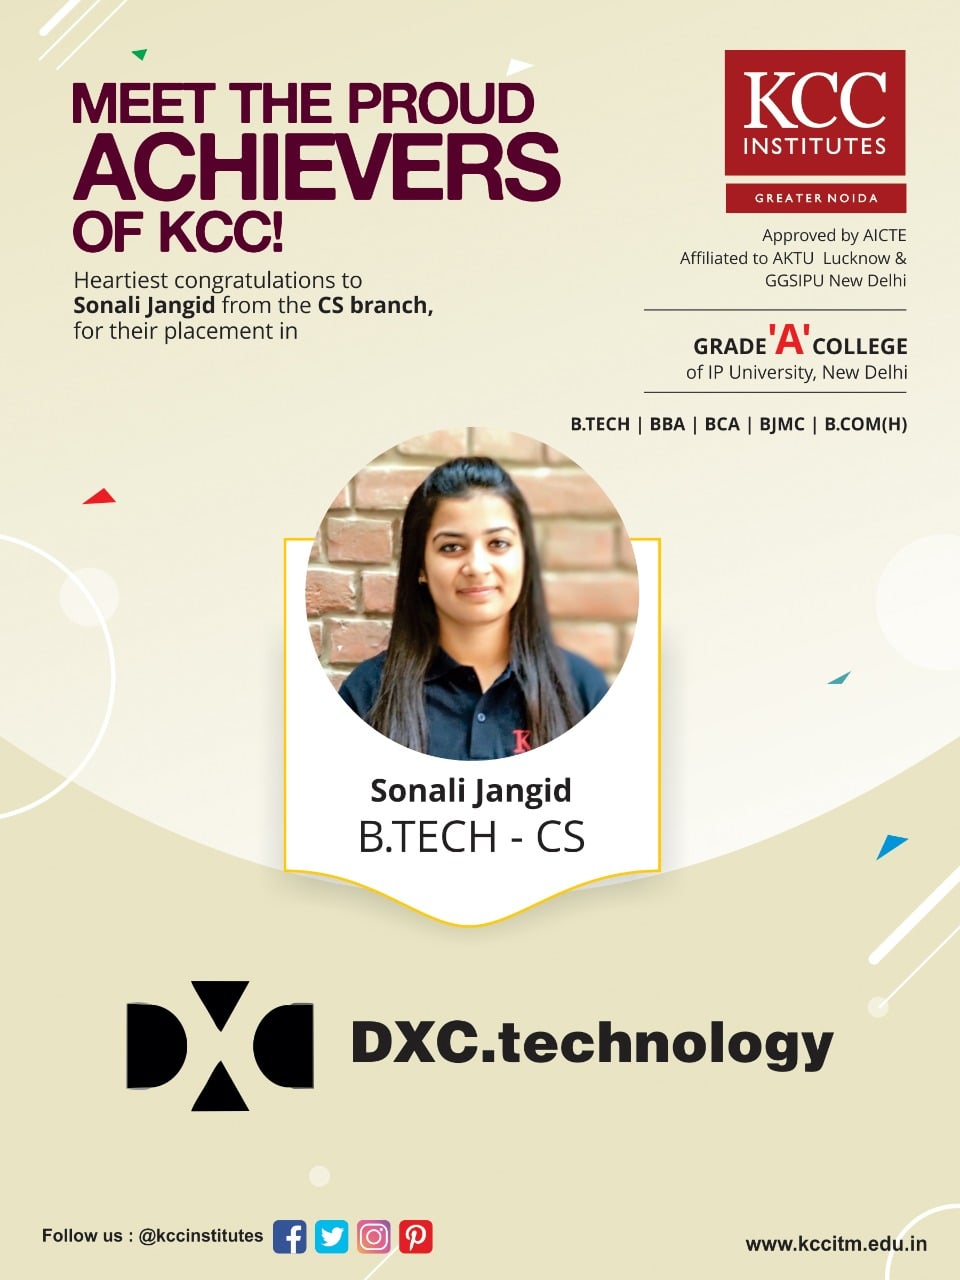 Congratulations Sonali Jangid from B.Tech CSE Branch for getting placed in DXC.technology